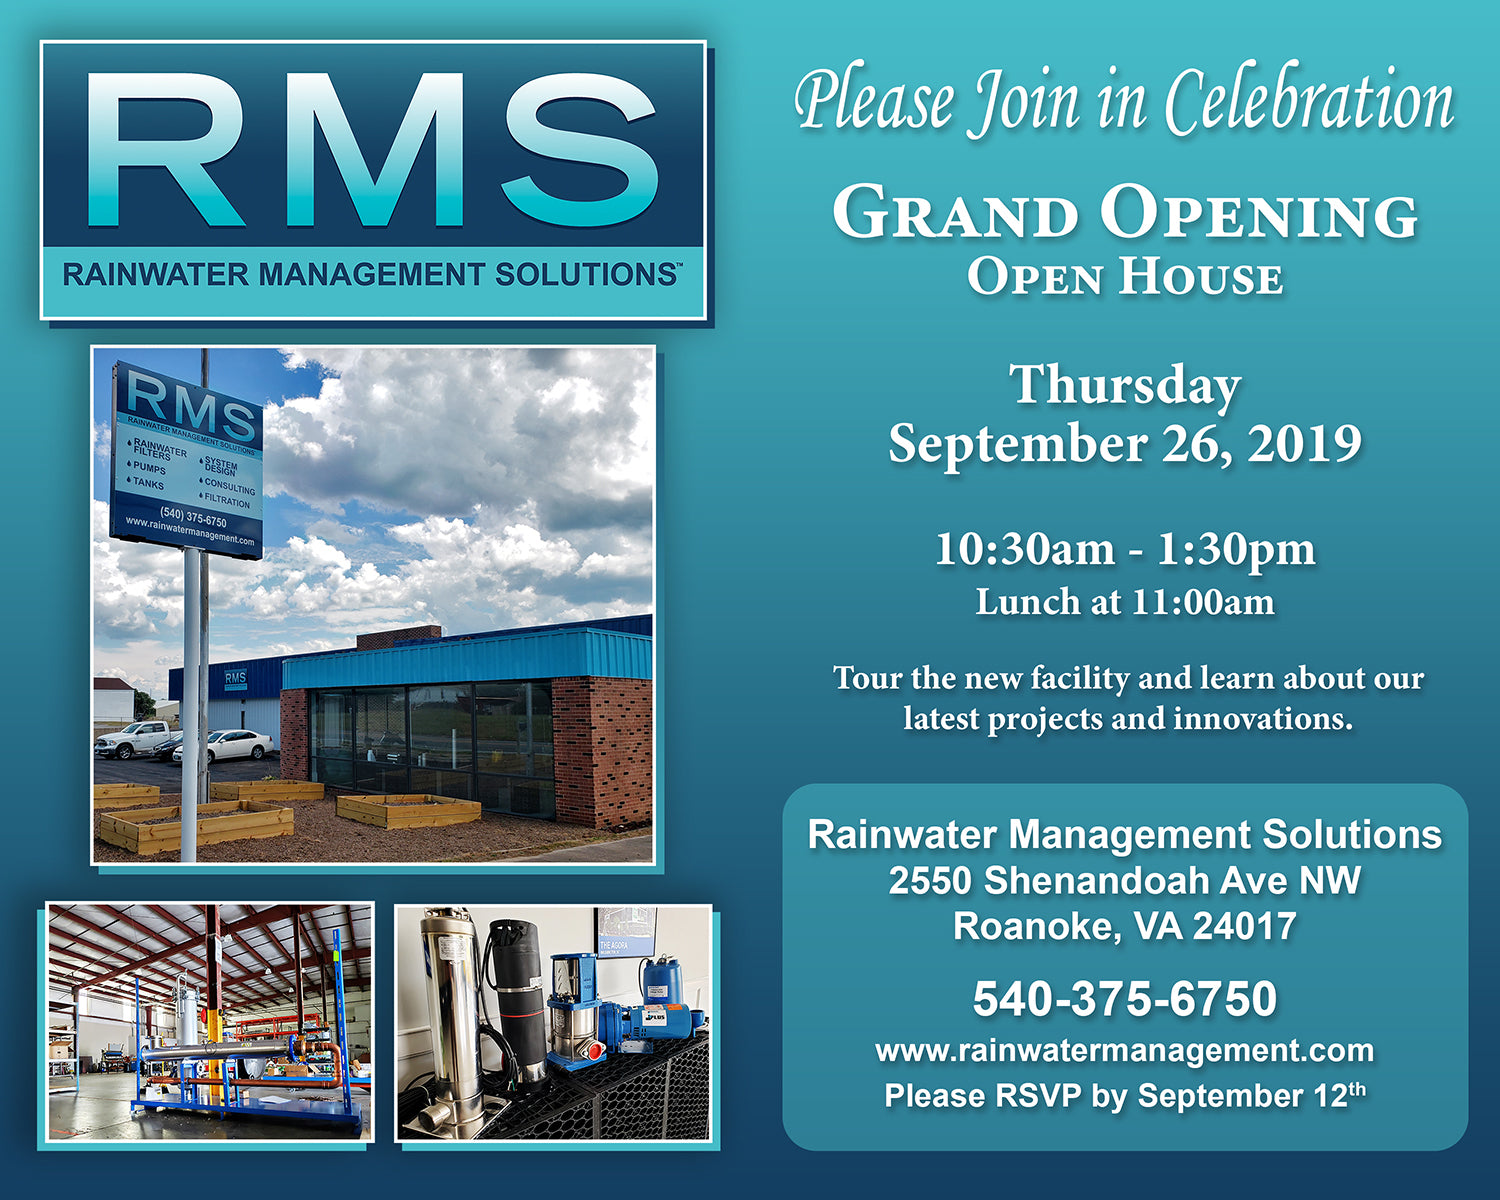 Rainwater Management Solutions Grand Opening and Open House